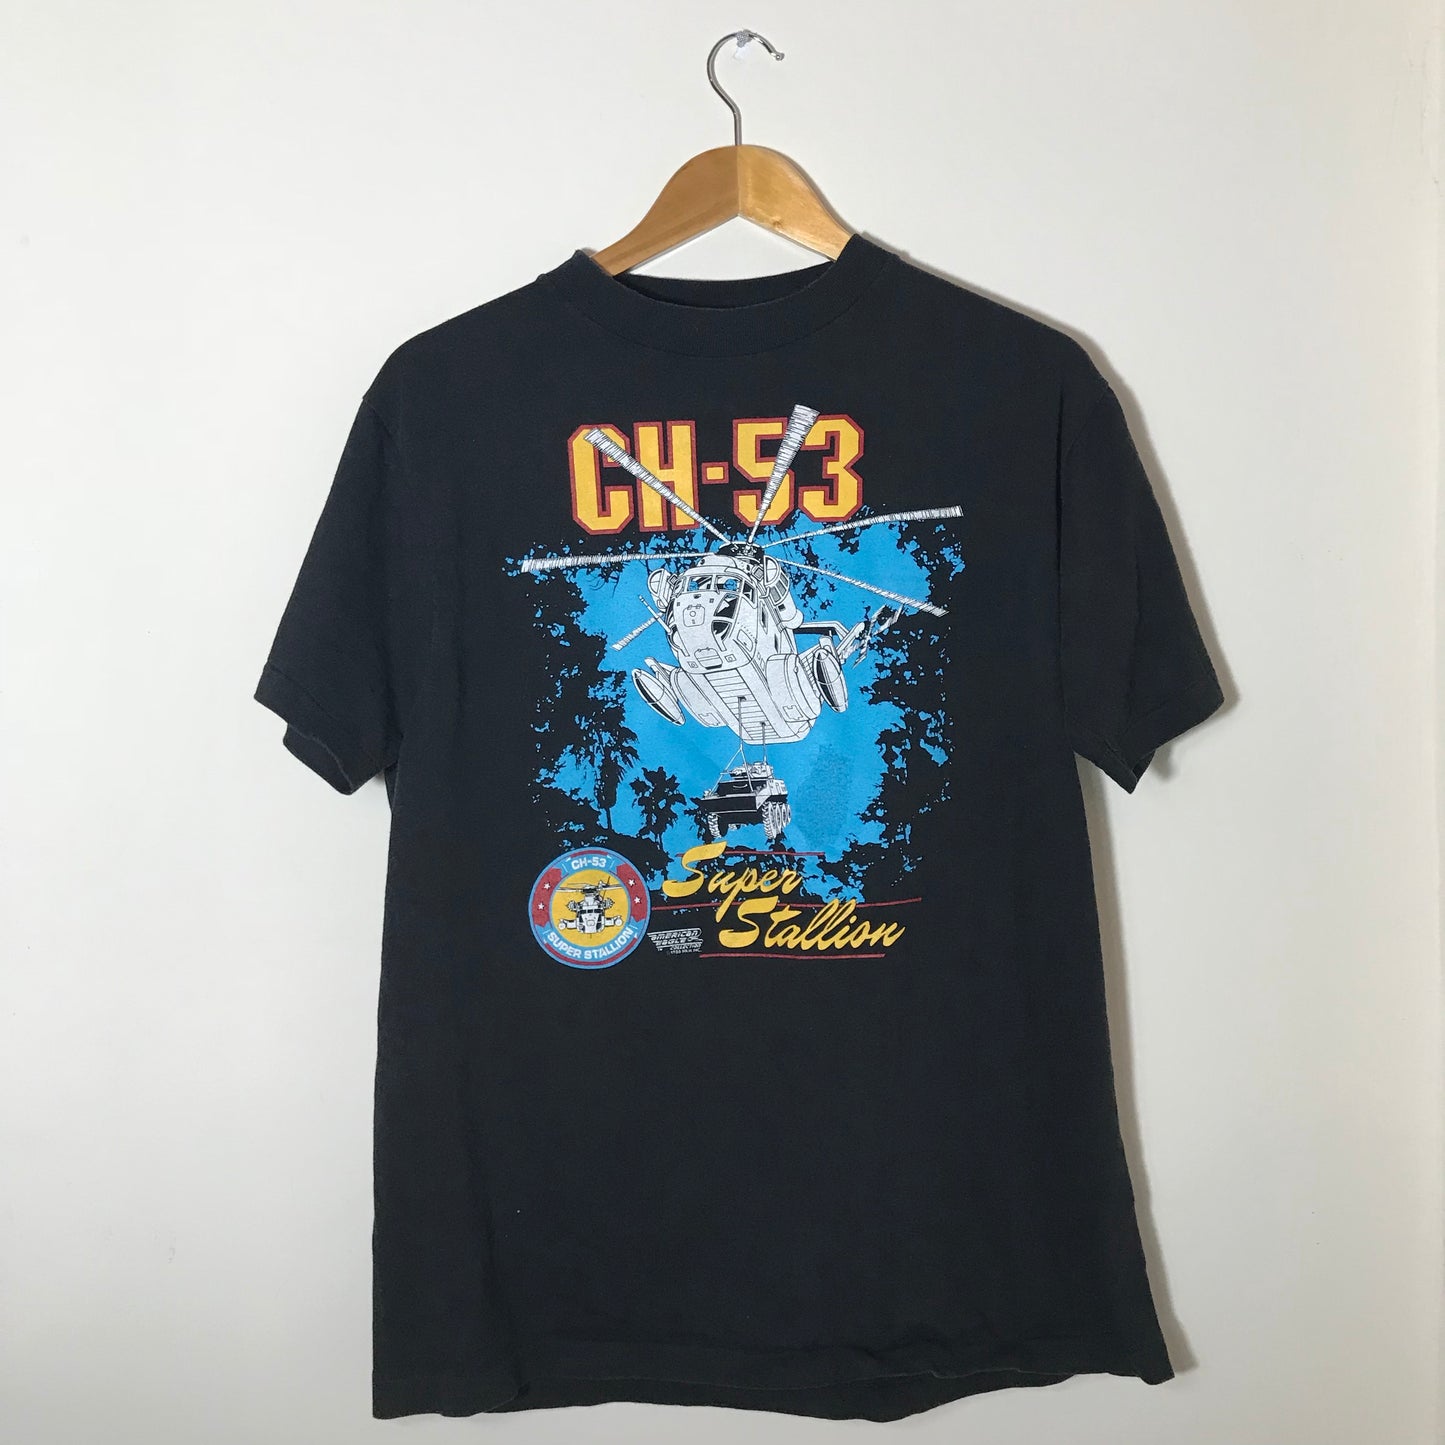 Vintage Helicopter T-shirt